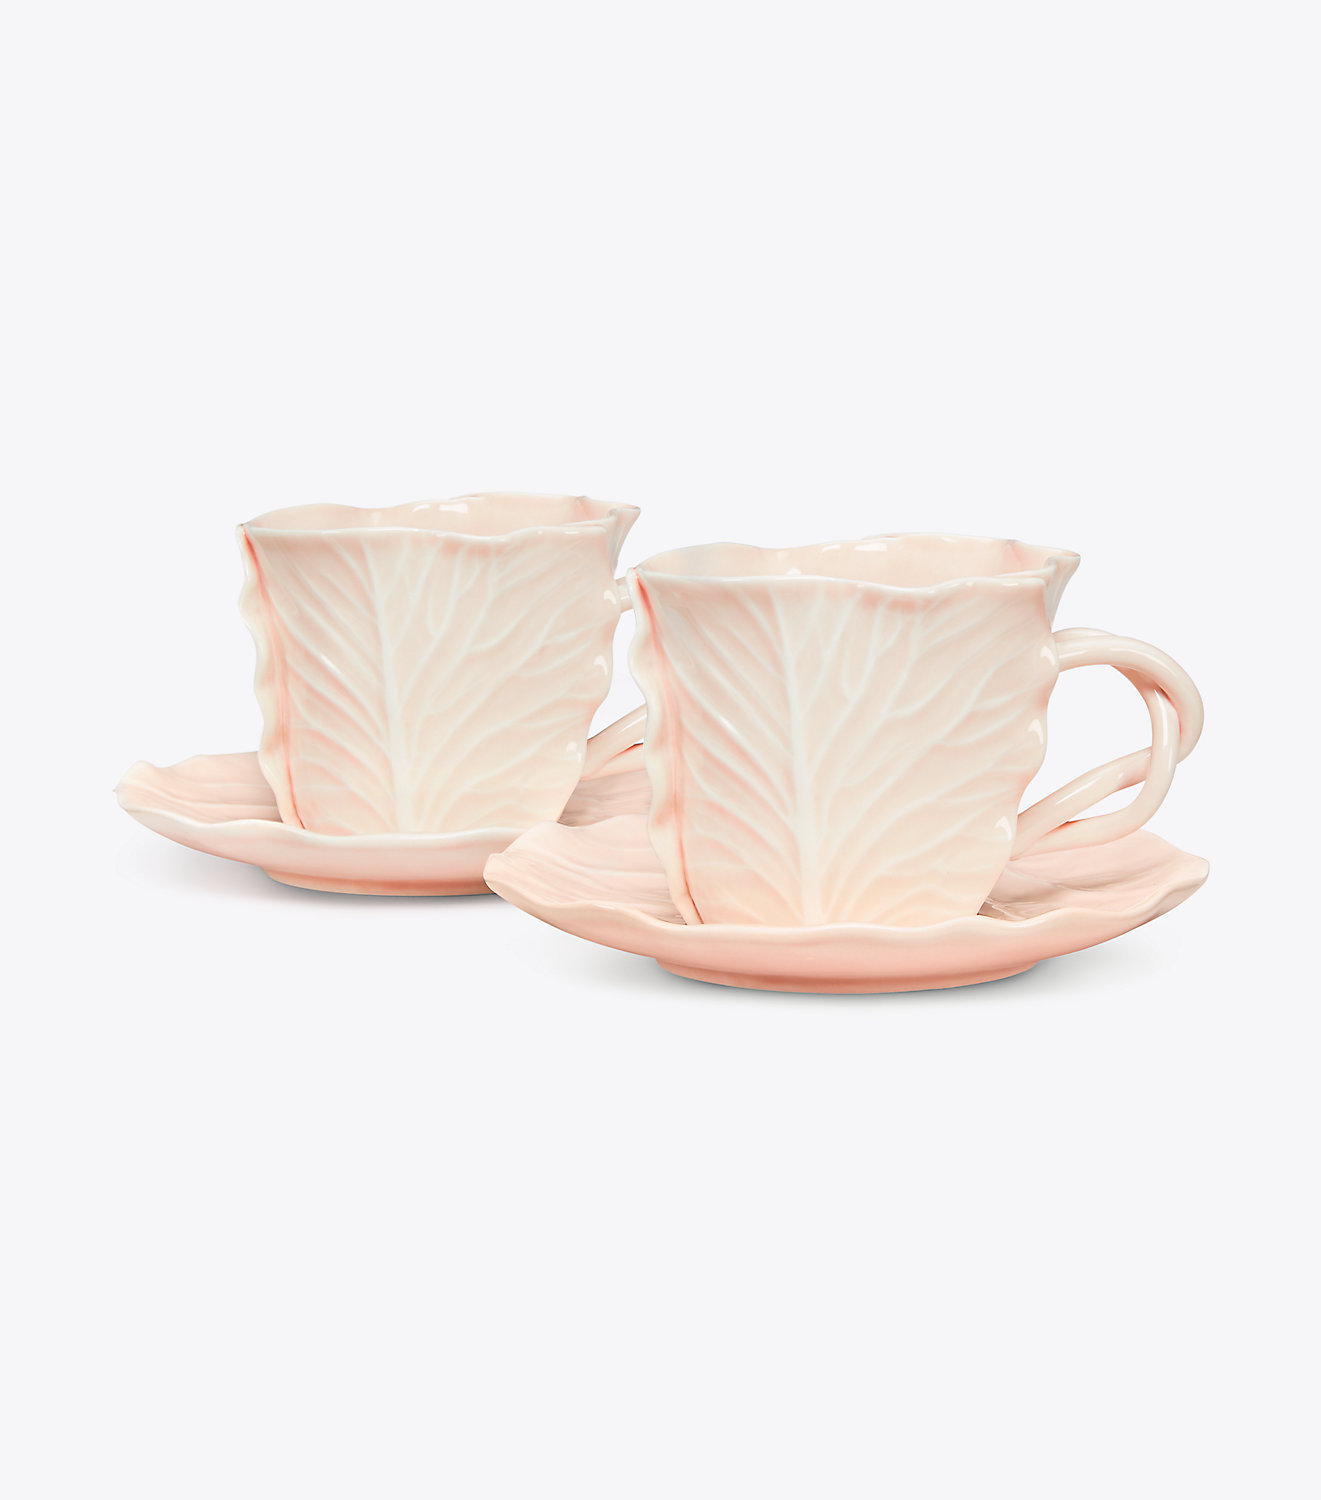 tory-burch-dodie-thayer-lettuce-ware-cabbage-pink-tea-cup -saucer-porcelain-ceramic